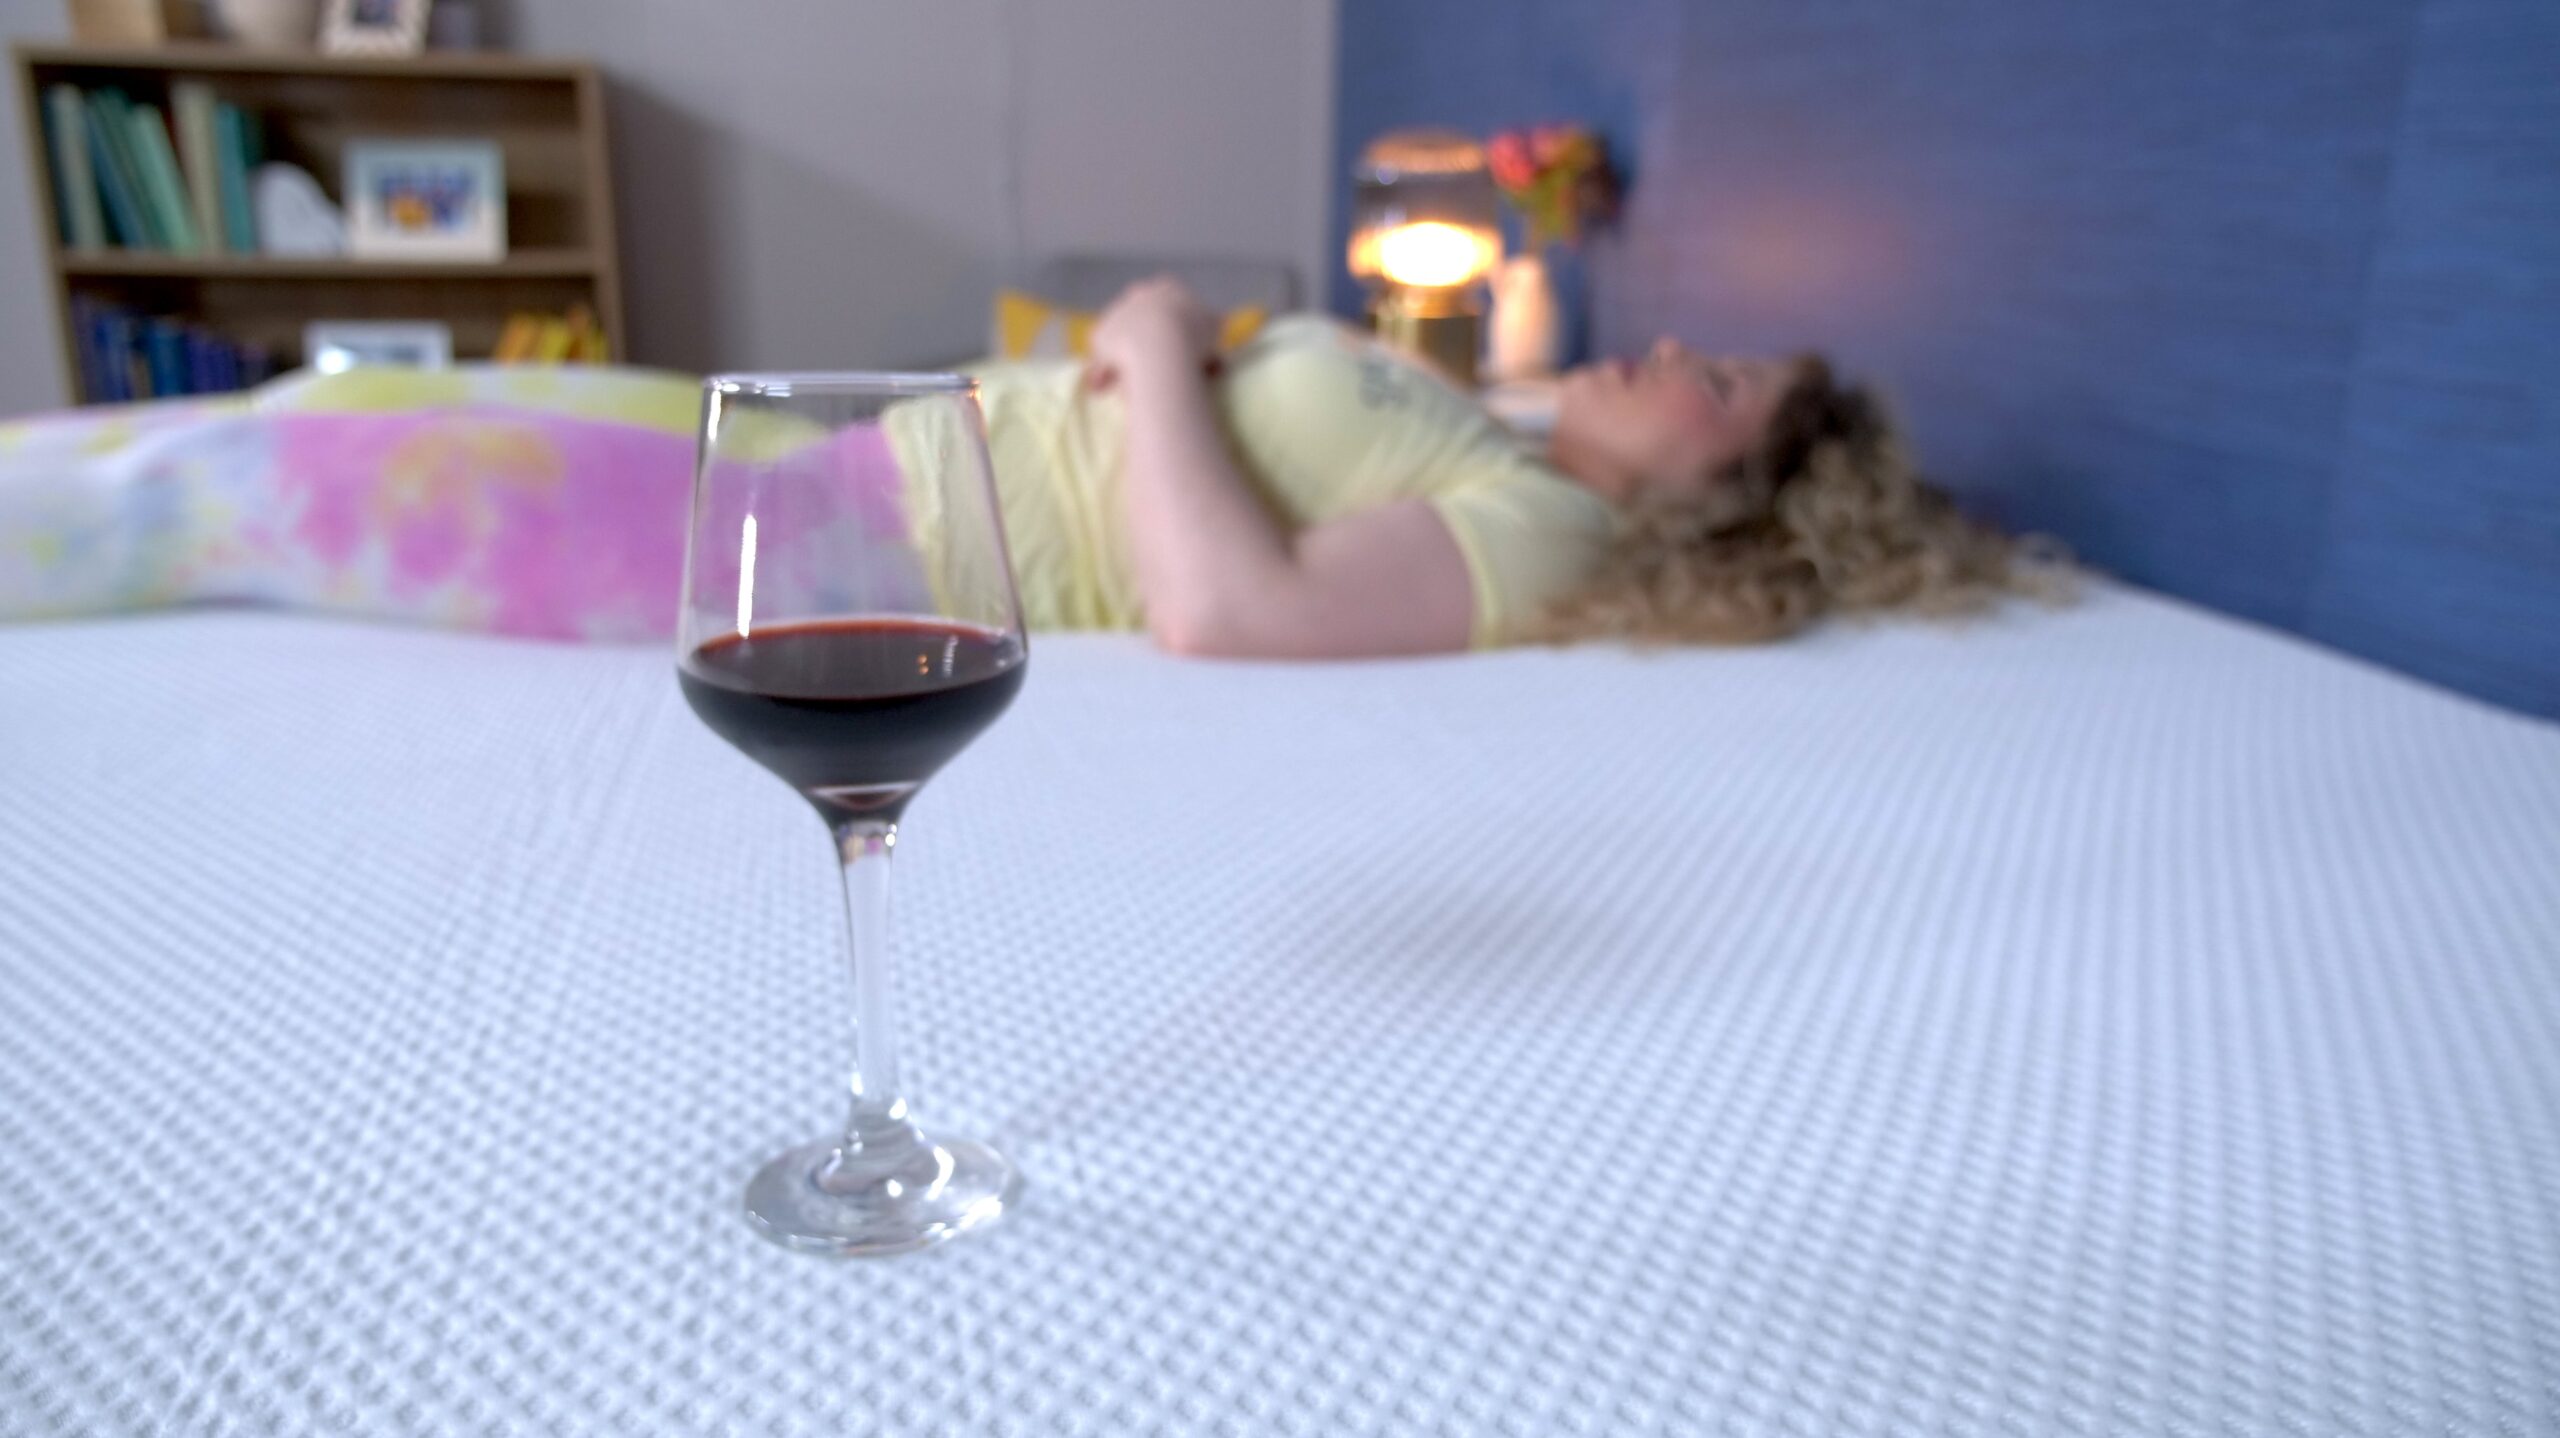 Nichole doing the wine test on the Nectar Premier Mattress